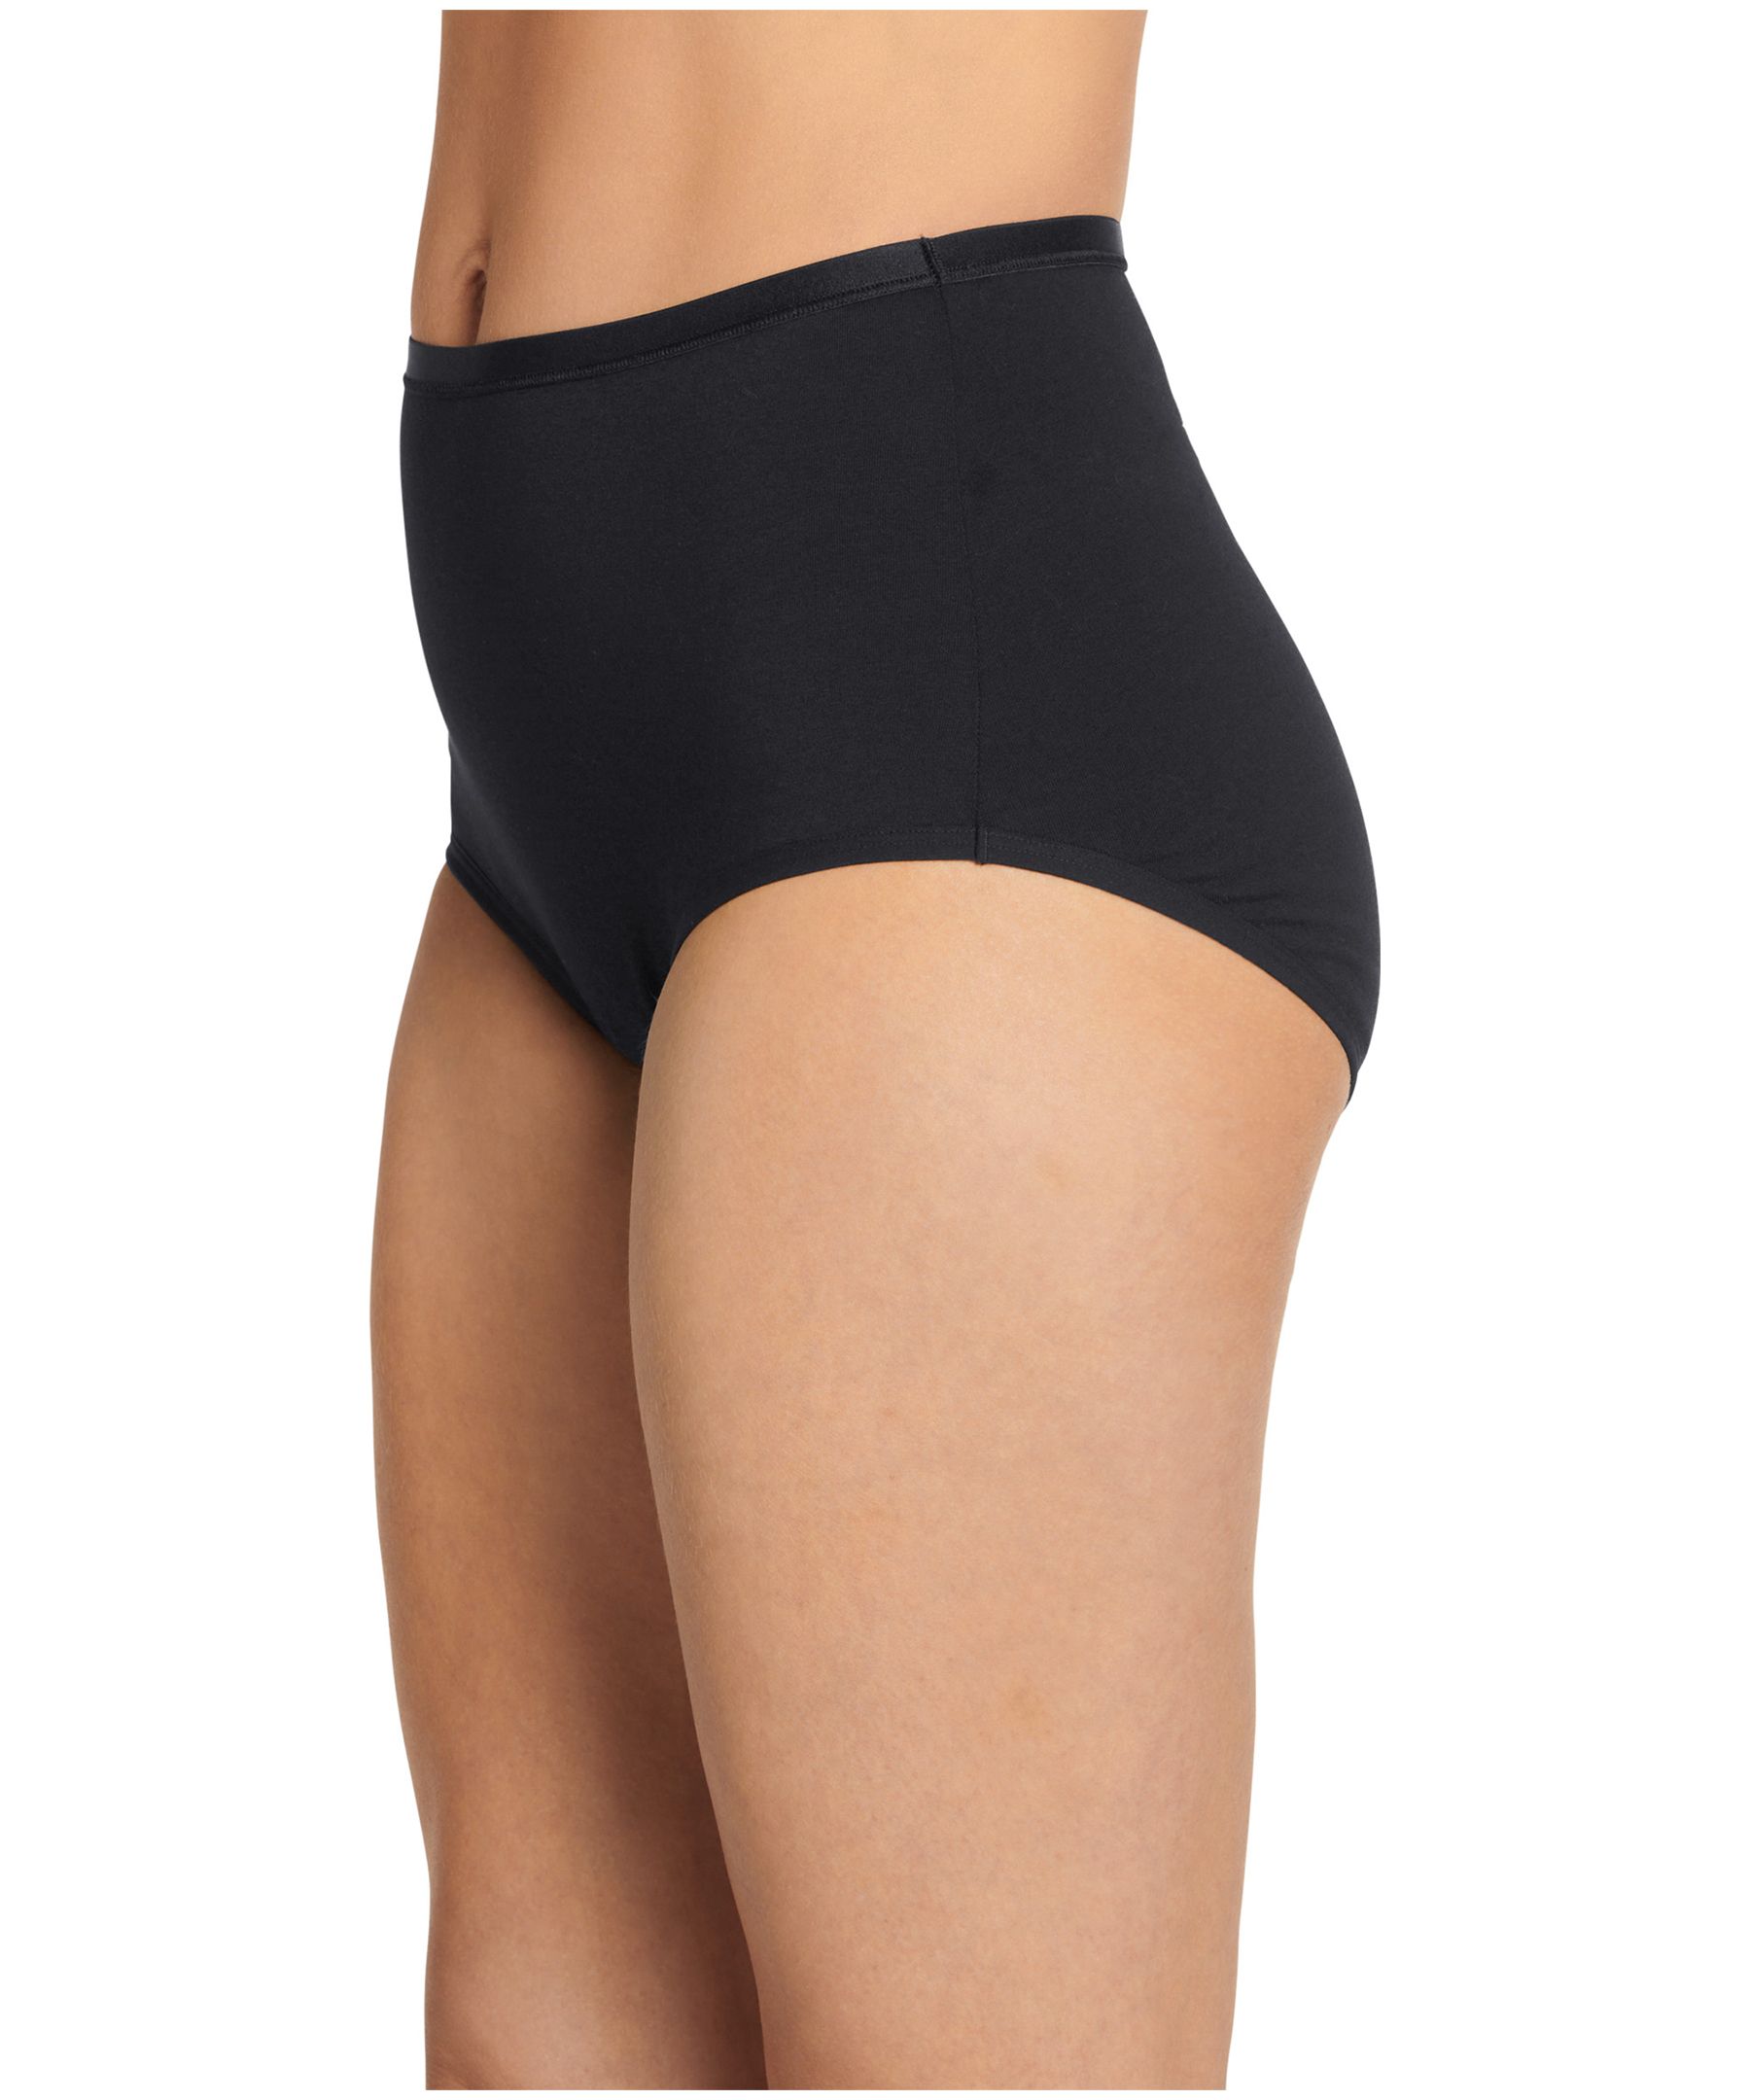 Jockey Women's Worry Free Cotton Briefs for Bladder Leaks and